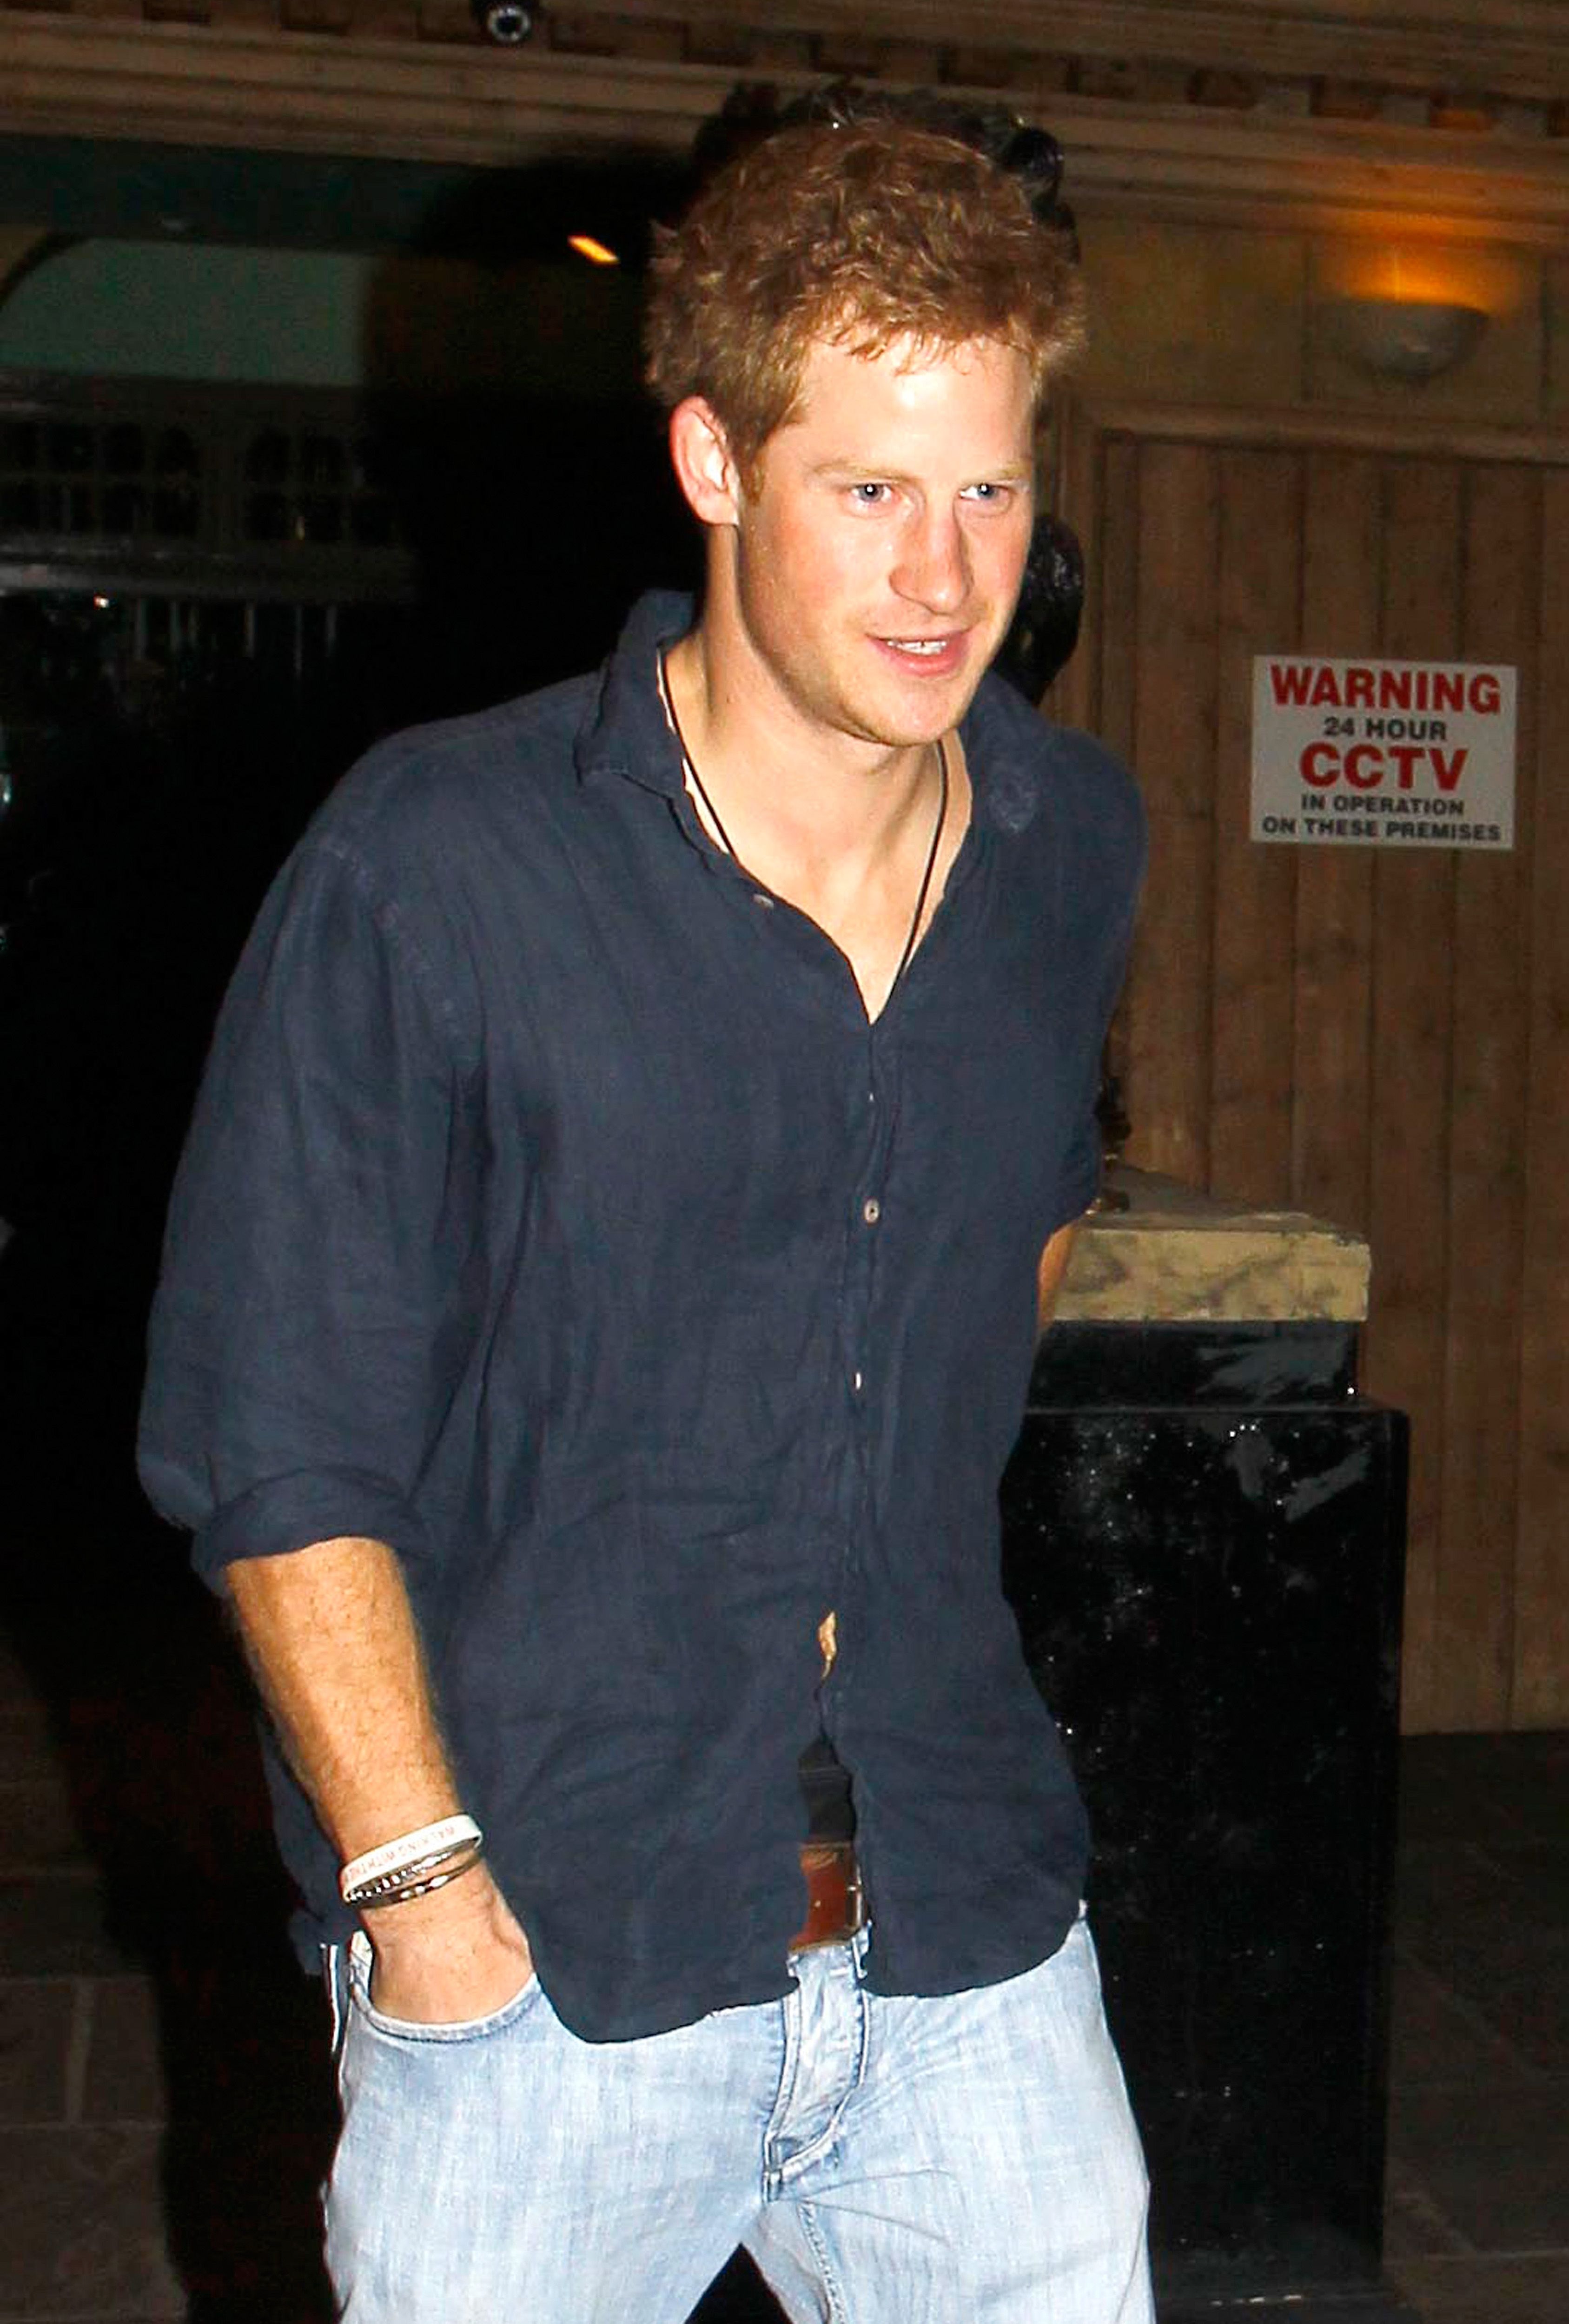 Prince Harry departs Public nightclub on September 24, 2011 | Getty Images